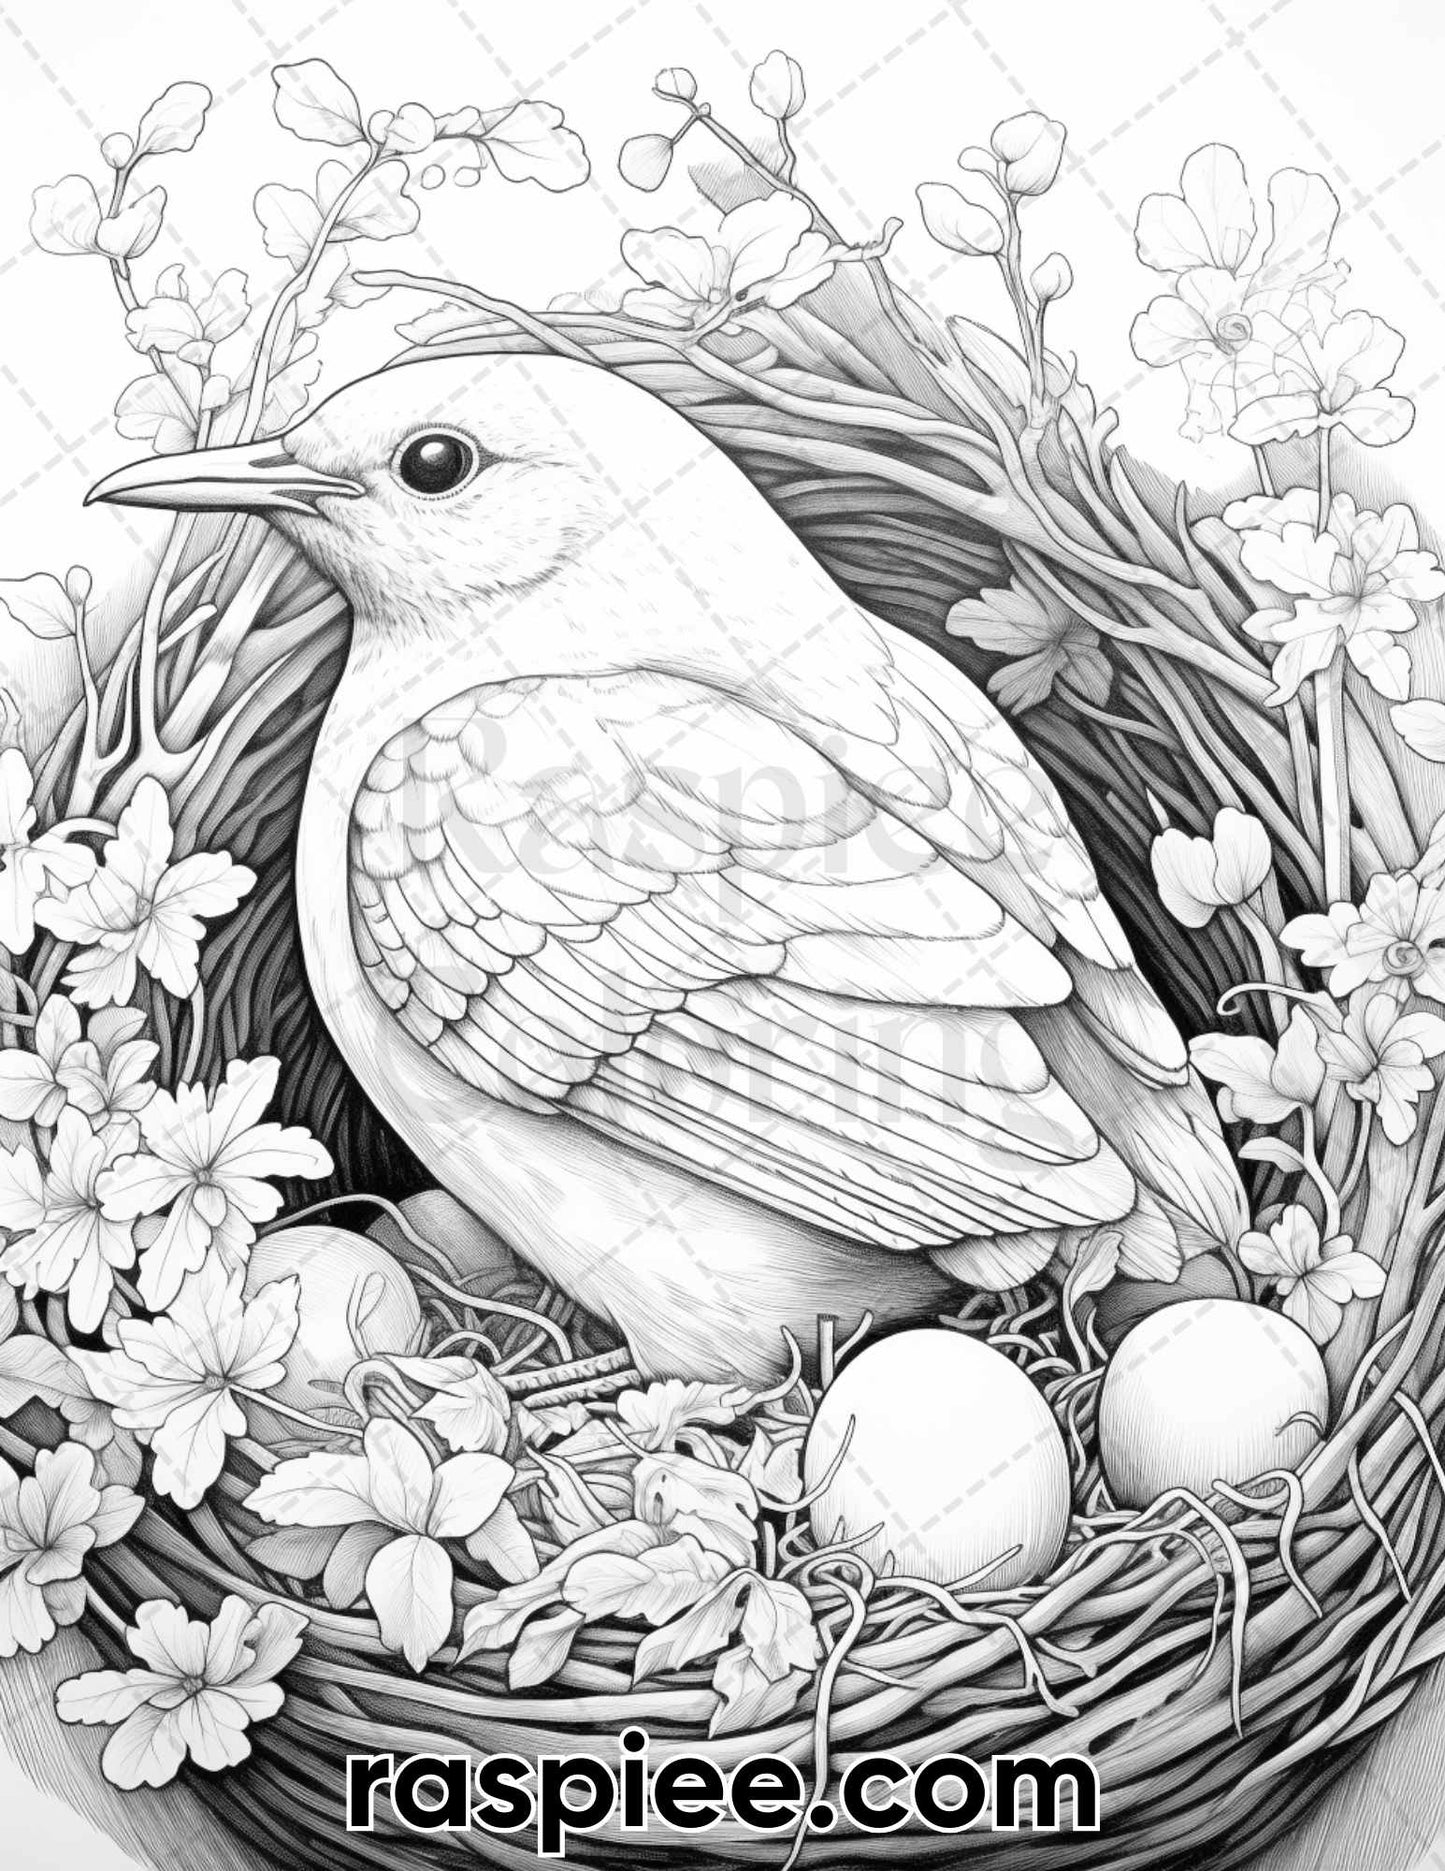 adult coloring pages, adult coloring sheets, adult coloring book pdf, adult coloring book printable, spring coloring pages for adults, spring coloring book, animal coloring pages for adults, animal coloring book, bird coloring pages, bird coloring book